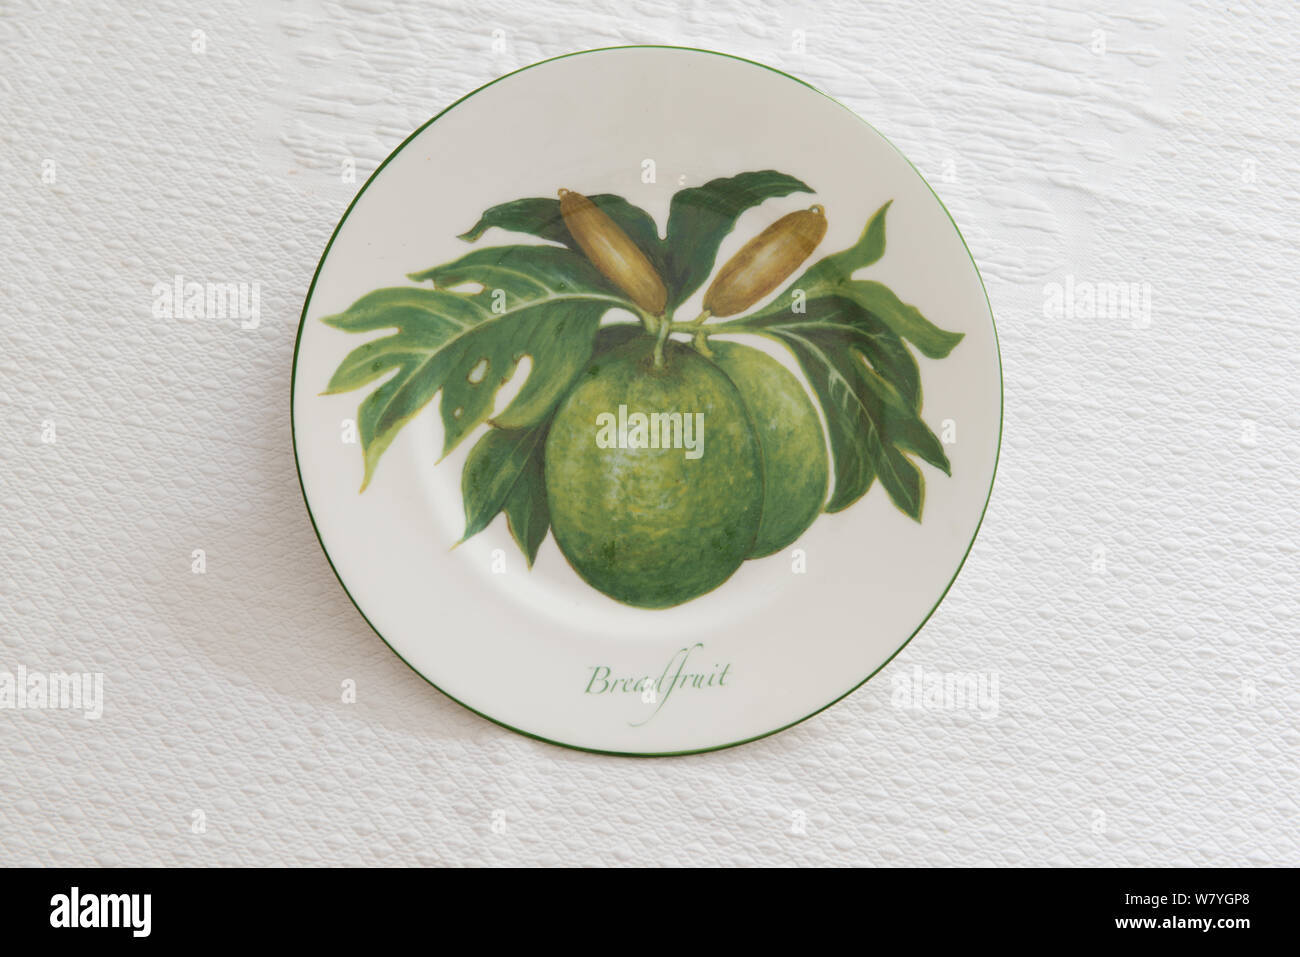 Plate from Jenny Mein's breadfruit collection Stock Photo